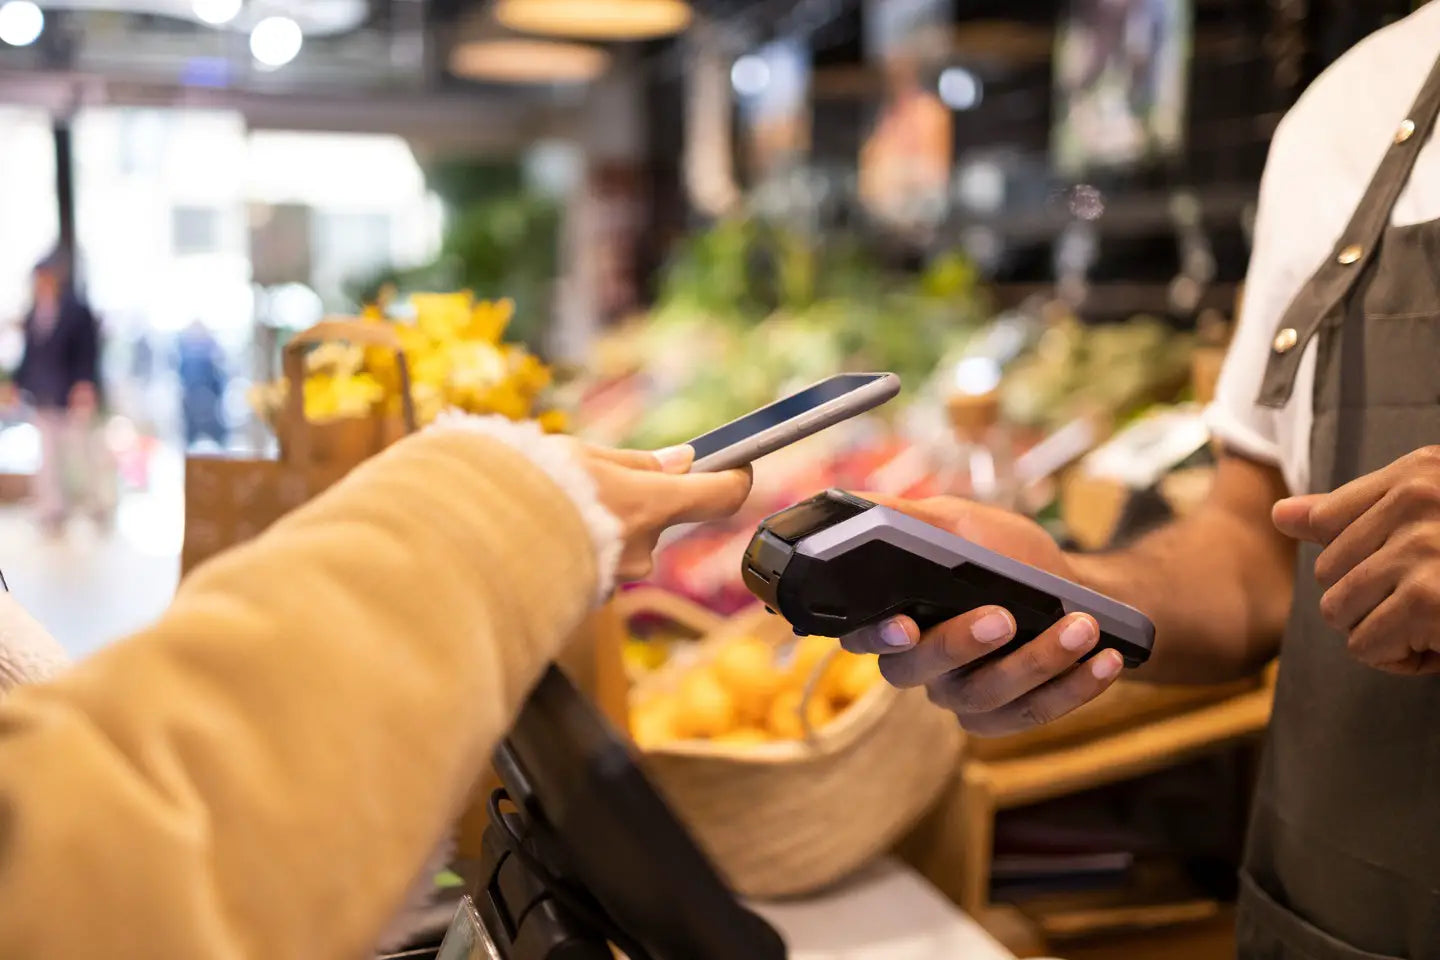 Transaction taking place as a customer uses their cell phone to complete a purchase with an employee at a grocery store